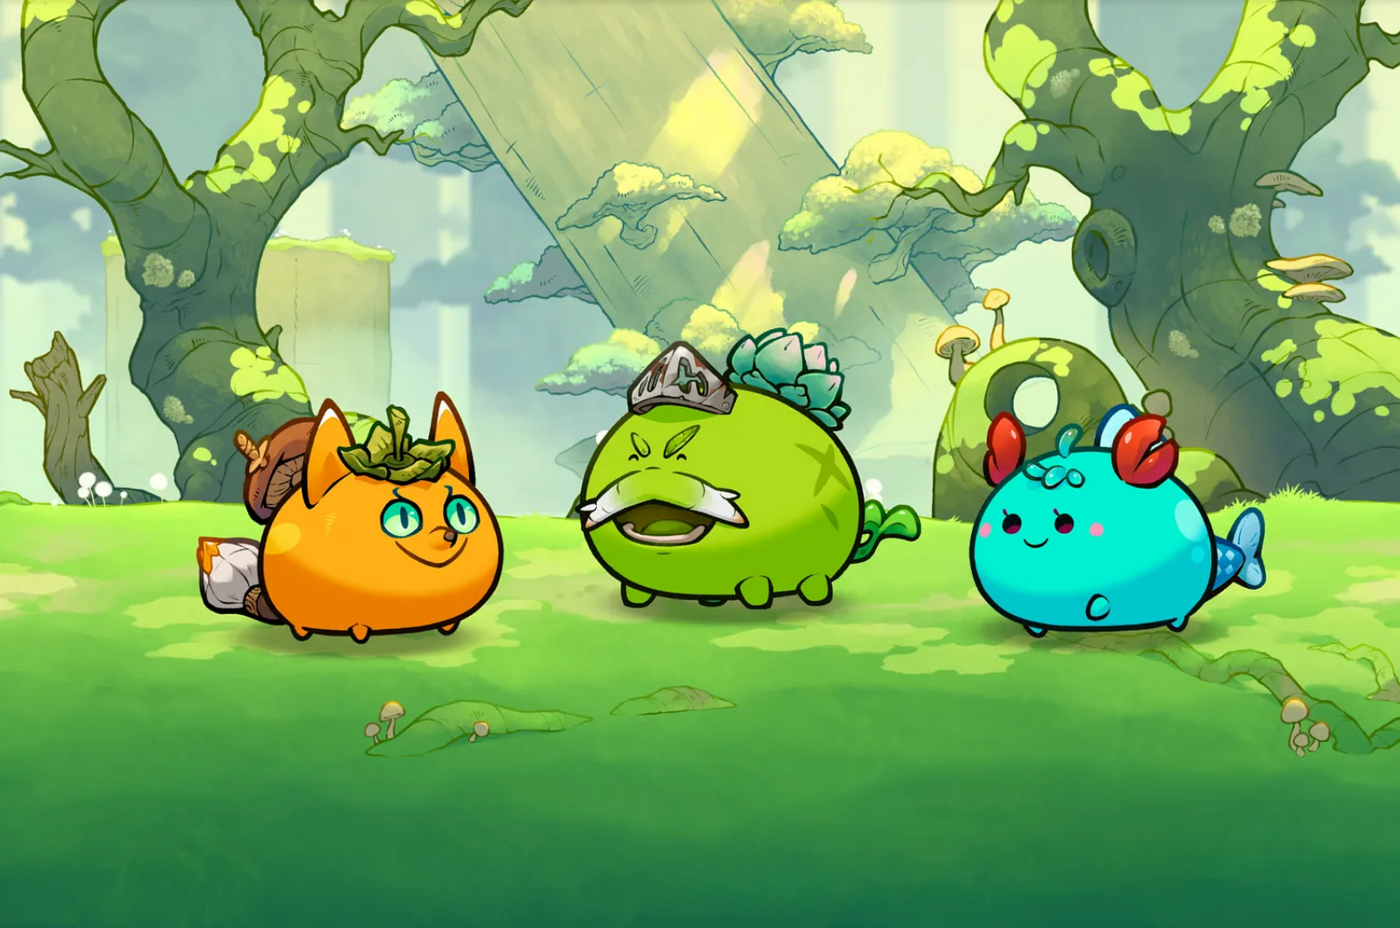 Axie Infinity play to earn metaverse game